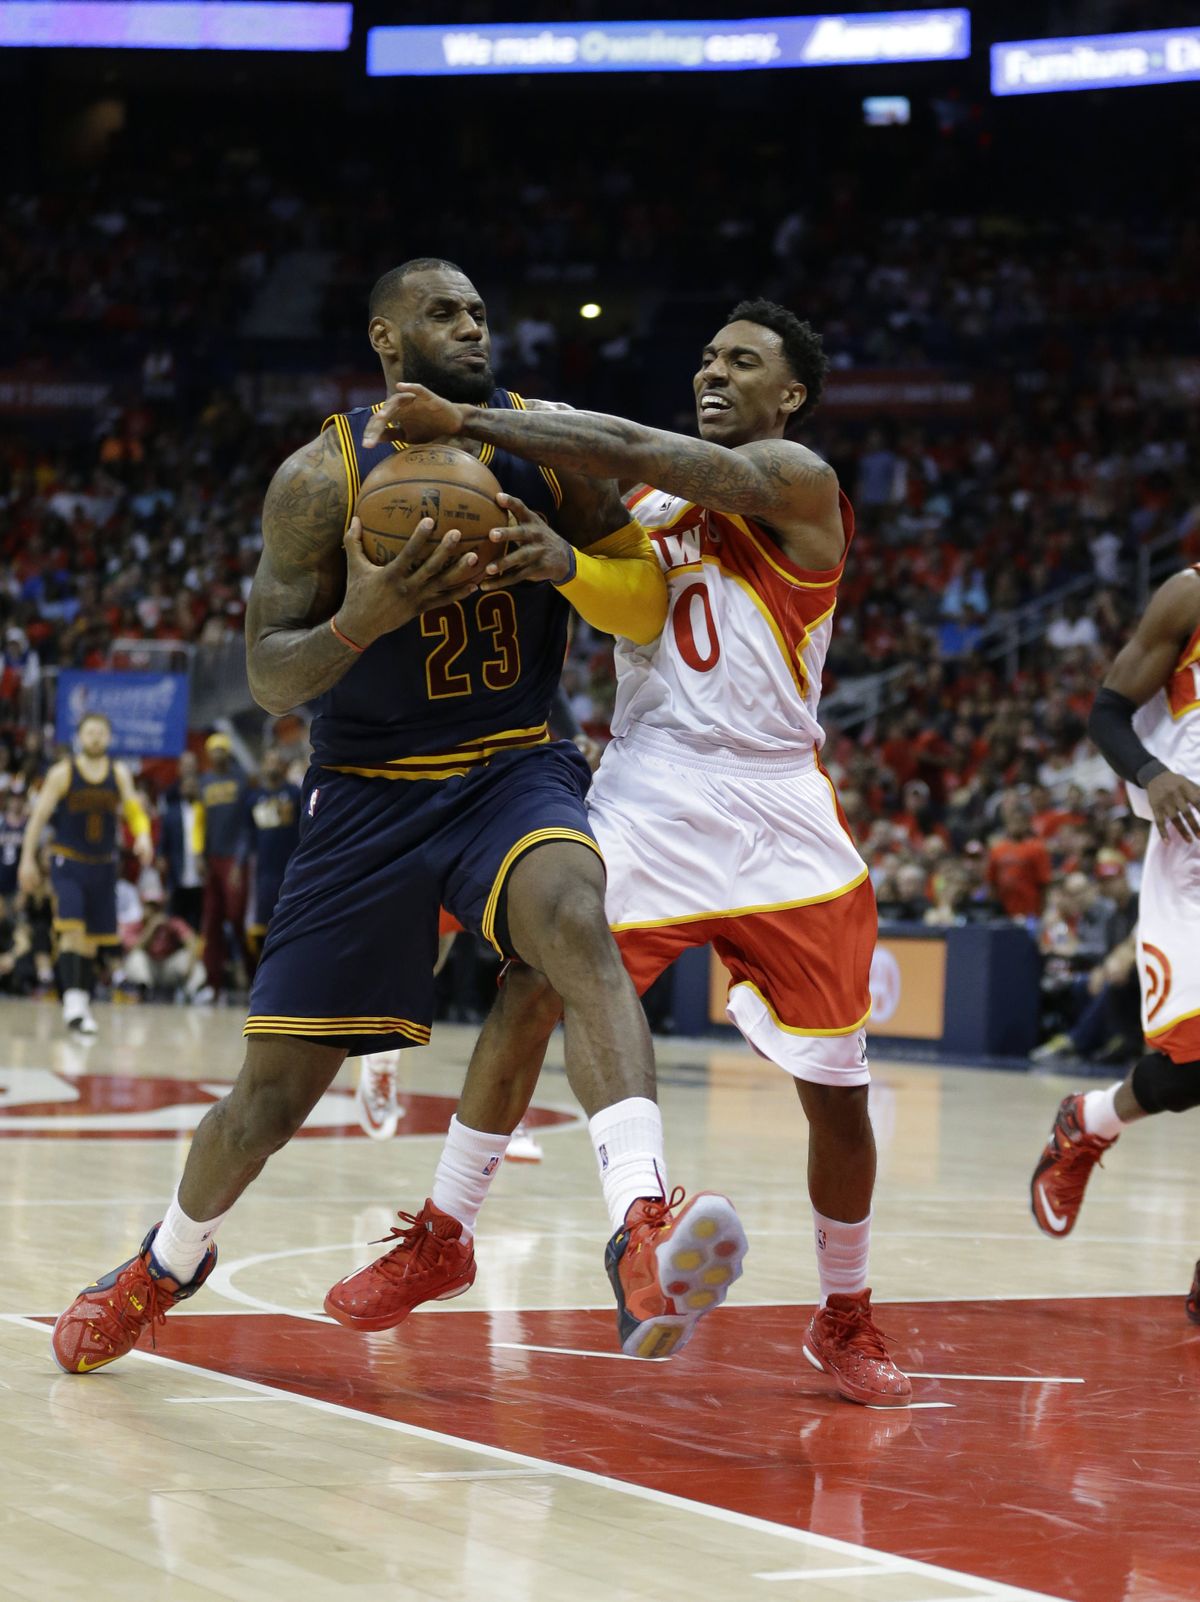 Cavaliers’ LeBron James, who scored 30 points Friday, is fouled by Hawks’ Jeff Teague, right. (Associated Press)